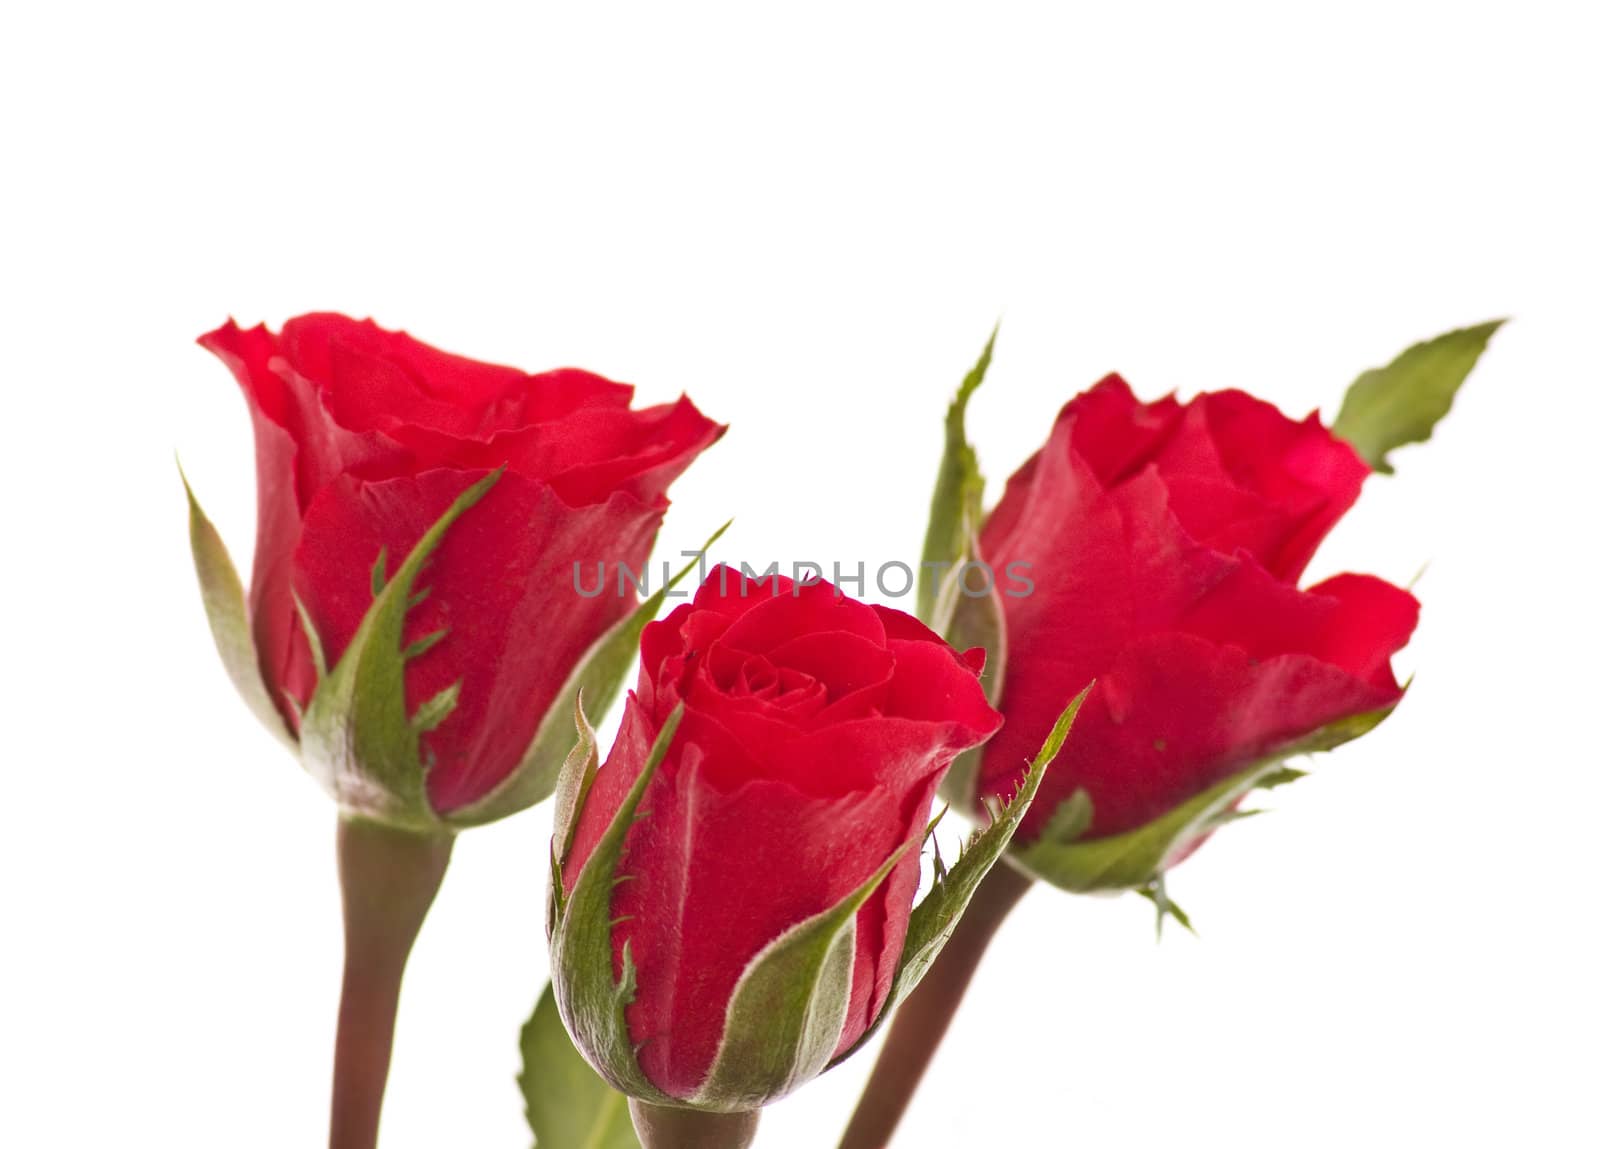 Three rose, isolated on a white background